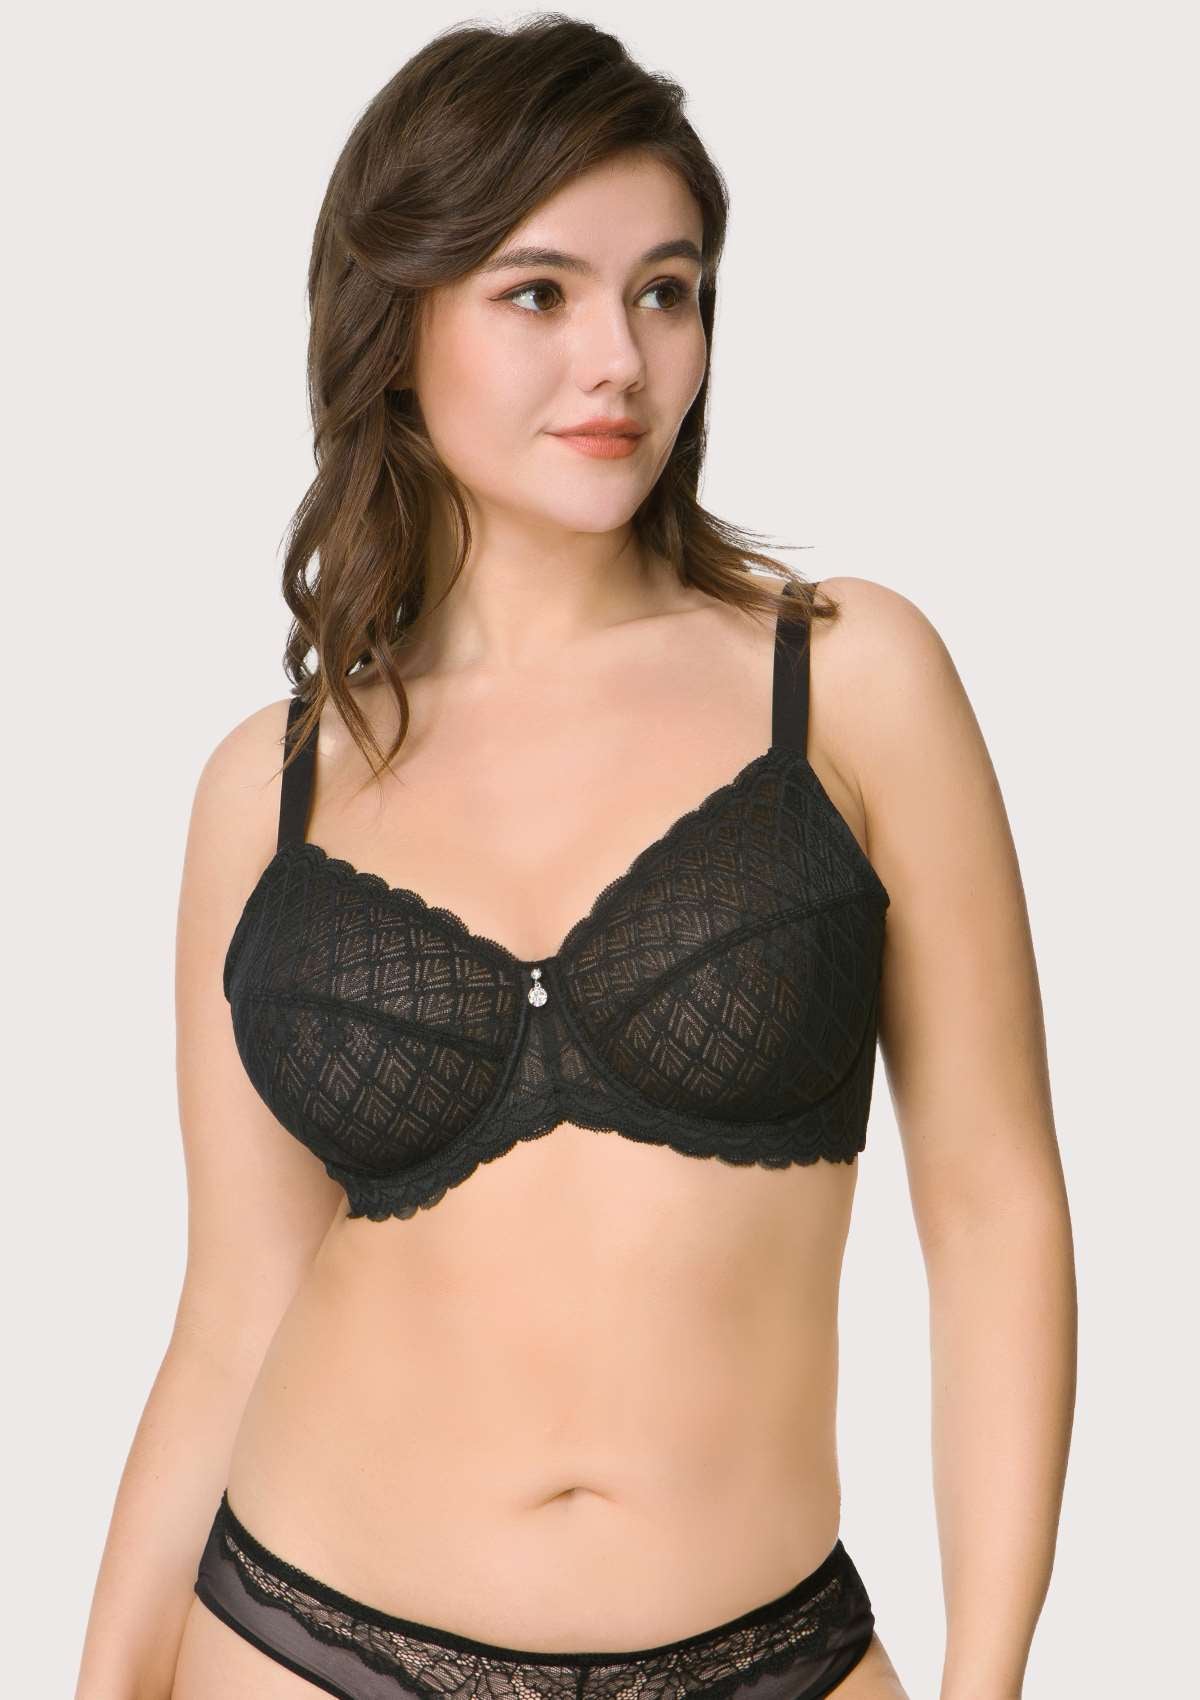 HSIA Plaid Full-Coverage Bra: Soft Bra With Thick Straps - Light Pink / 36 / C